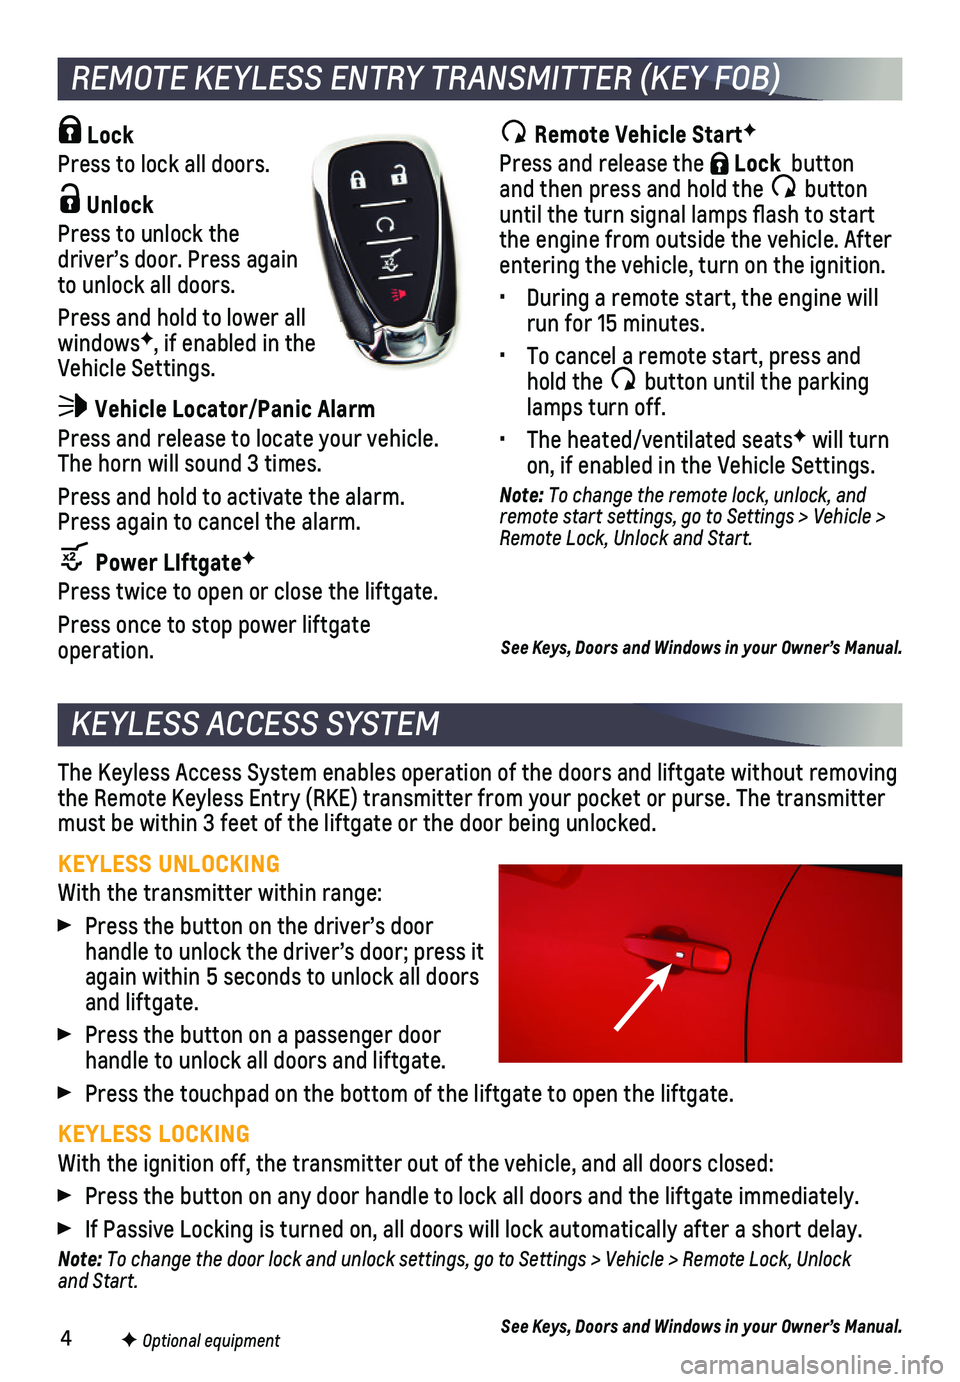 CHEVROLET BLAZER 2019  Get To Know Guide 4
KEYLESS ACCESS SYSTEM
The Keyless Access System enables operation of the doors and liftgate wi\
thout removing the Remote Keyless Entry (RKE) transmitter from your pocket or purse. \
The transmitter